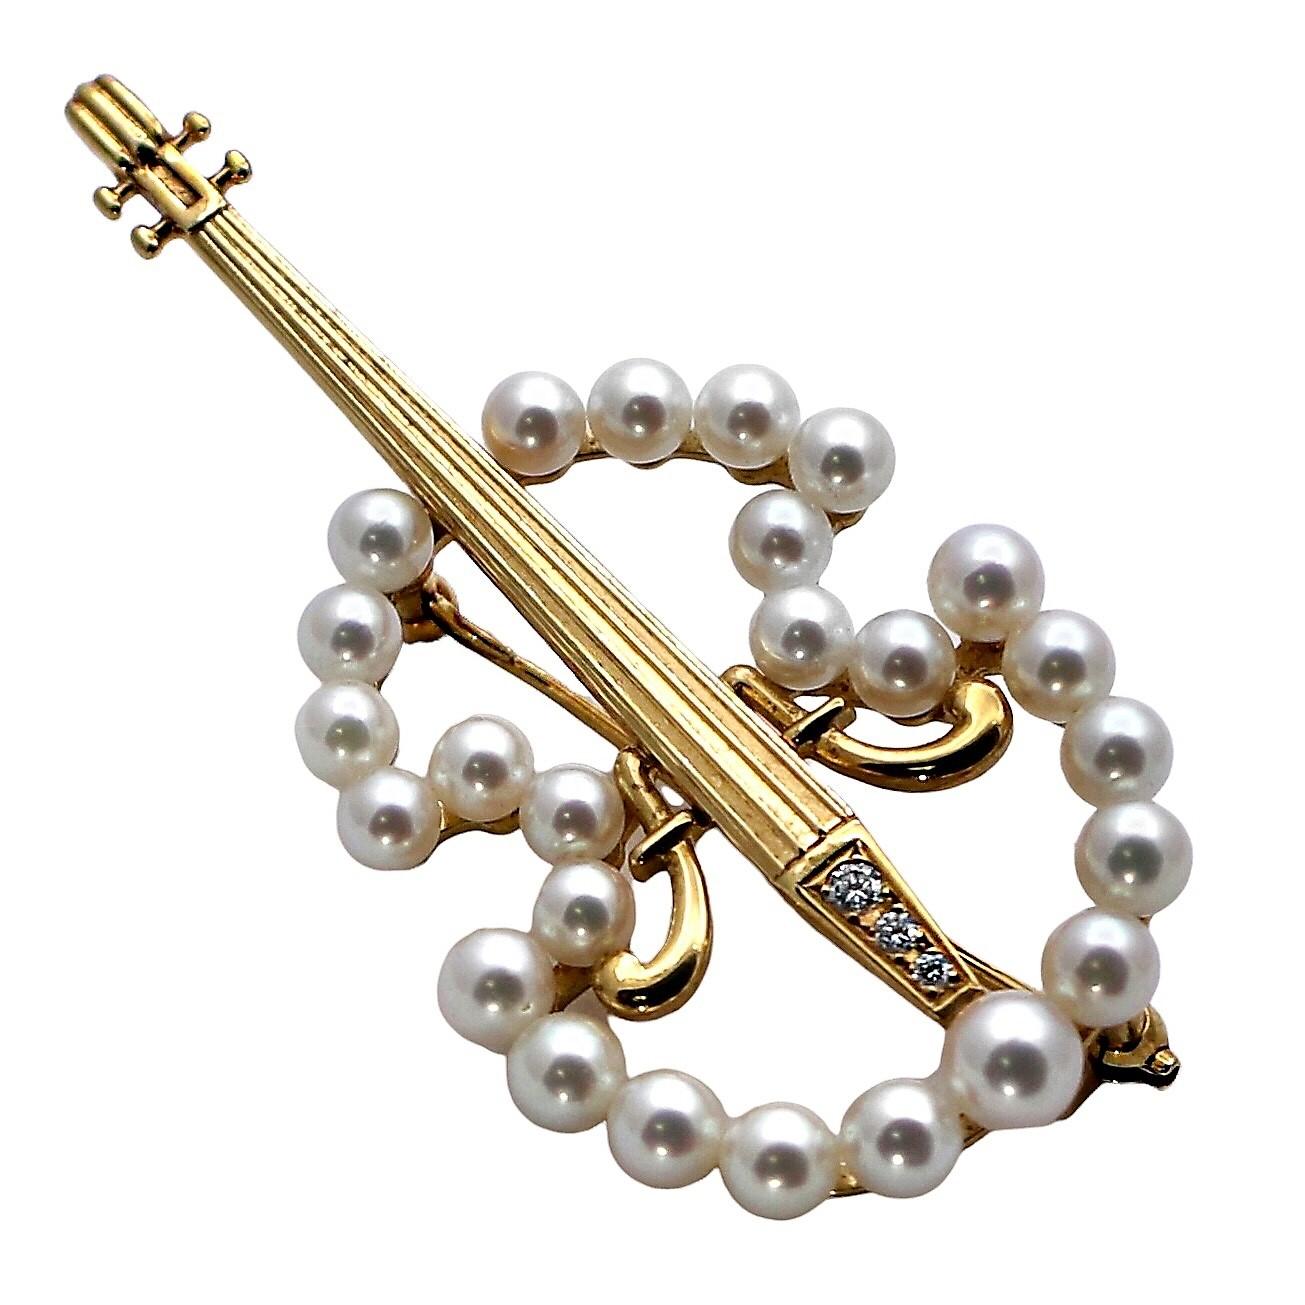 This very well crafted and artistic, vintage, 18K yellow gold violin brooch is set with 25 fine, Mikimoto Japanese cultured pearls measuring from 4.15mm to 4.35mm, as well as three brilliant cut diamonds. Total approximate diamond weight is .10ct